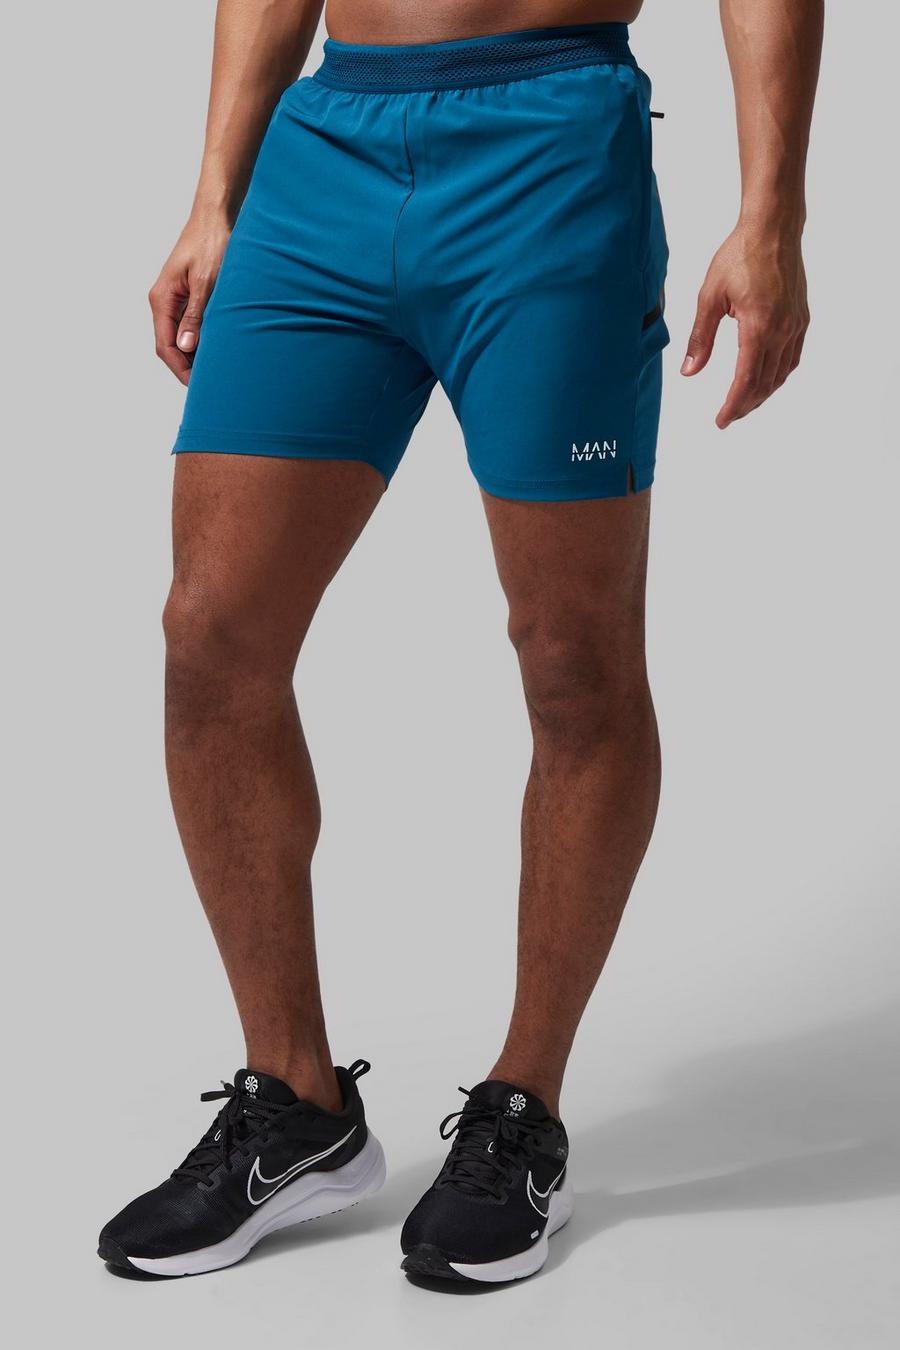 Man Active Performance-Shorts, Teal image number 1